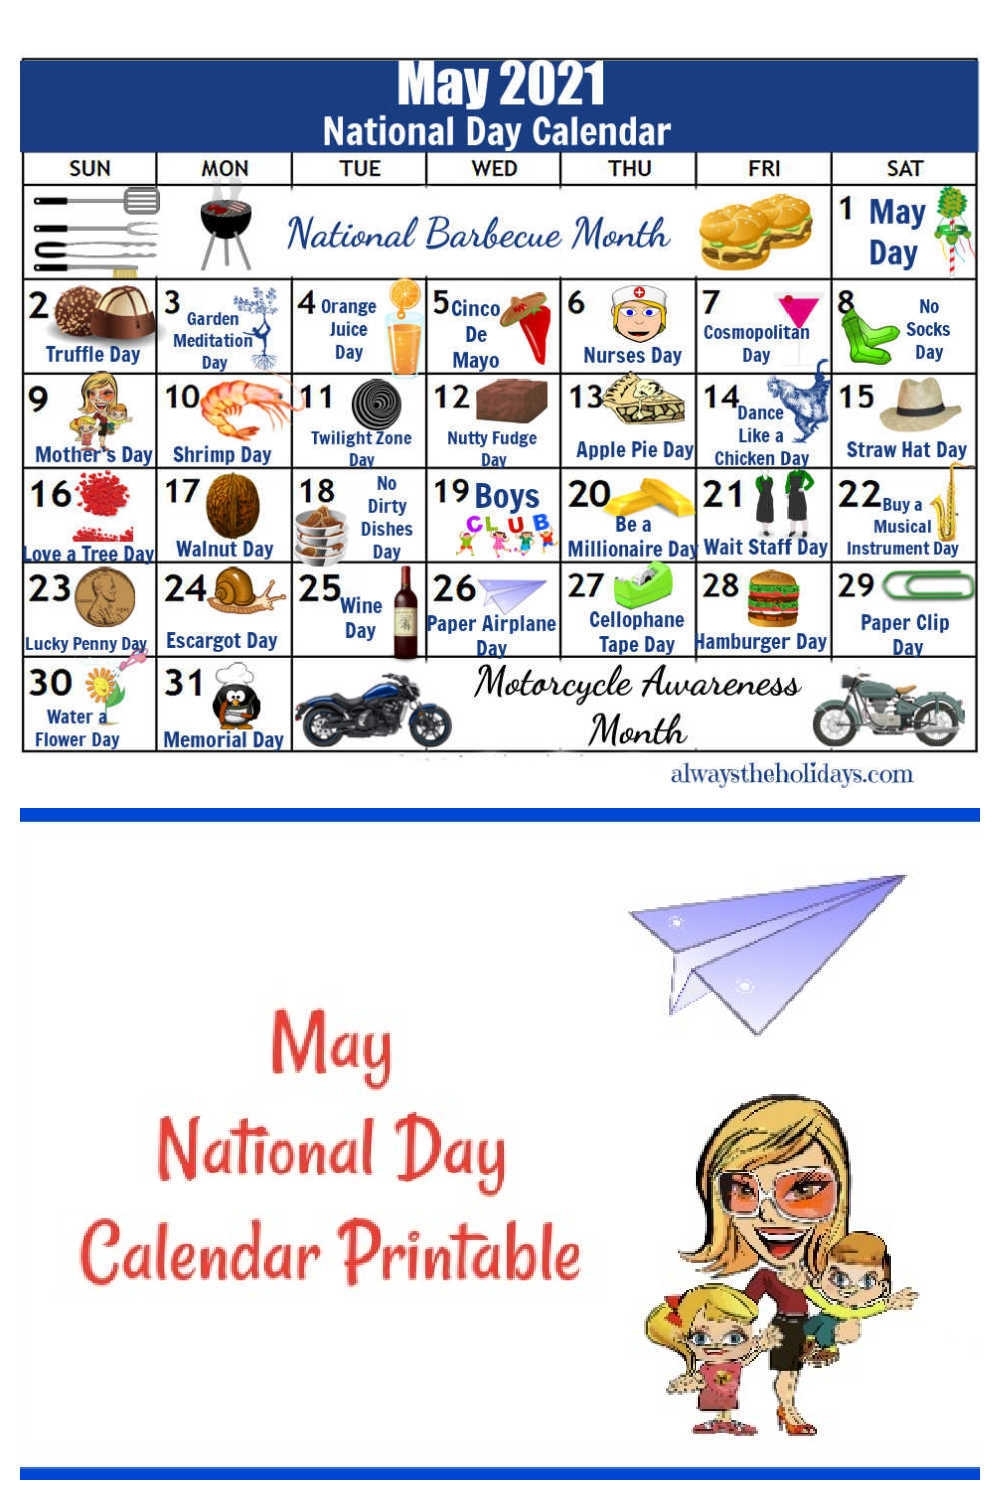 May National Day Calendar - Free Printable - Always The